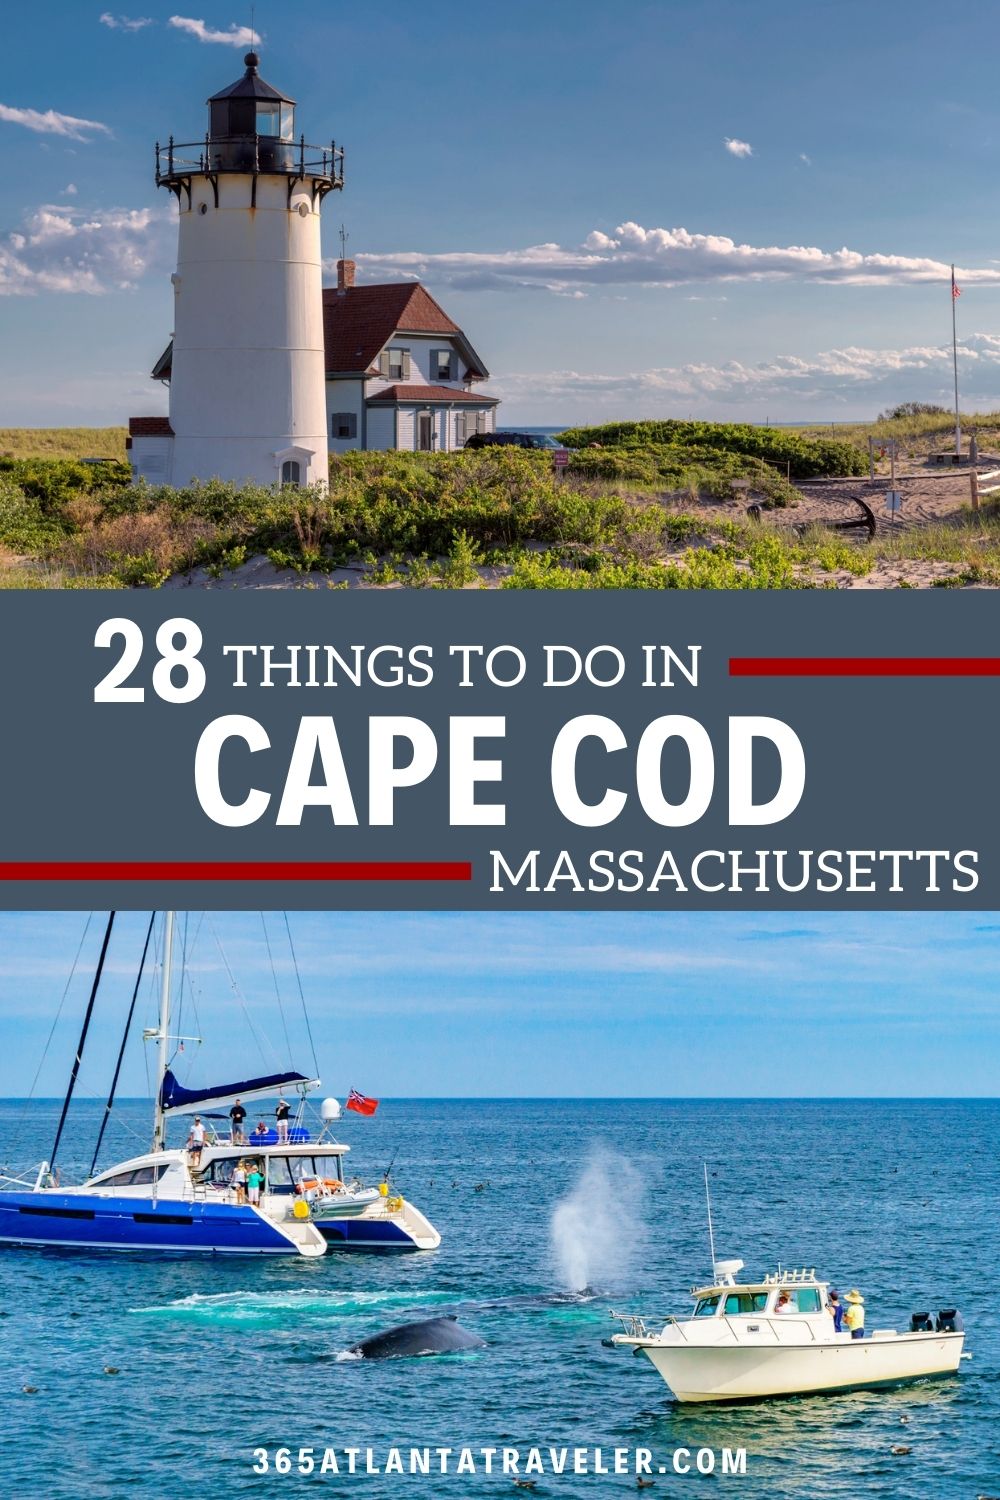 28 Things To Do in Cape Cod You Just Can’t Miss